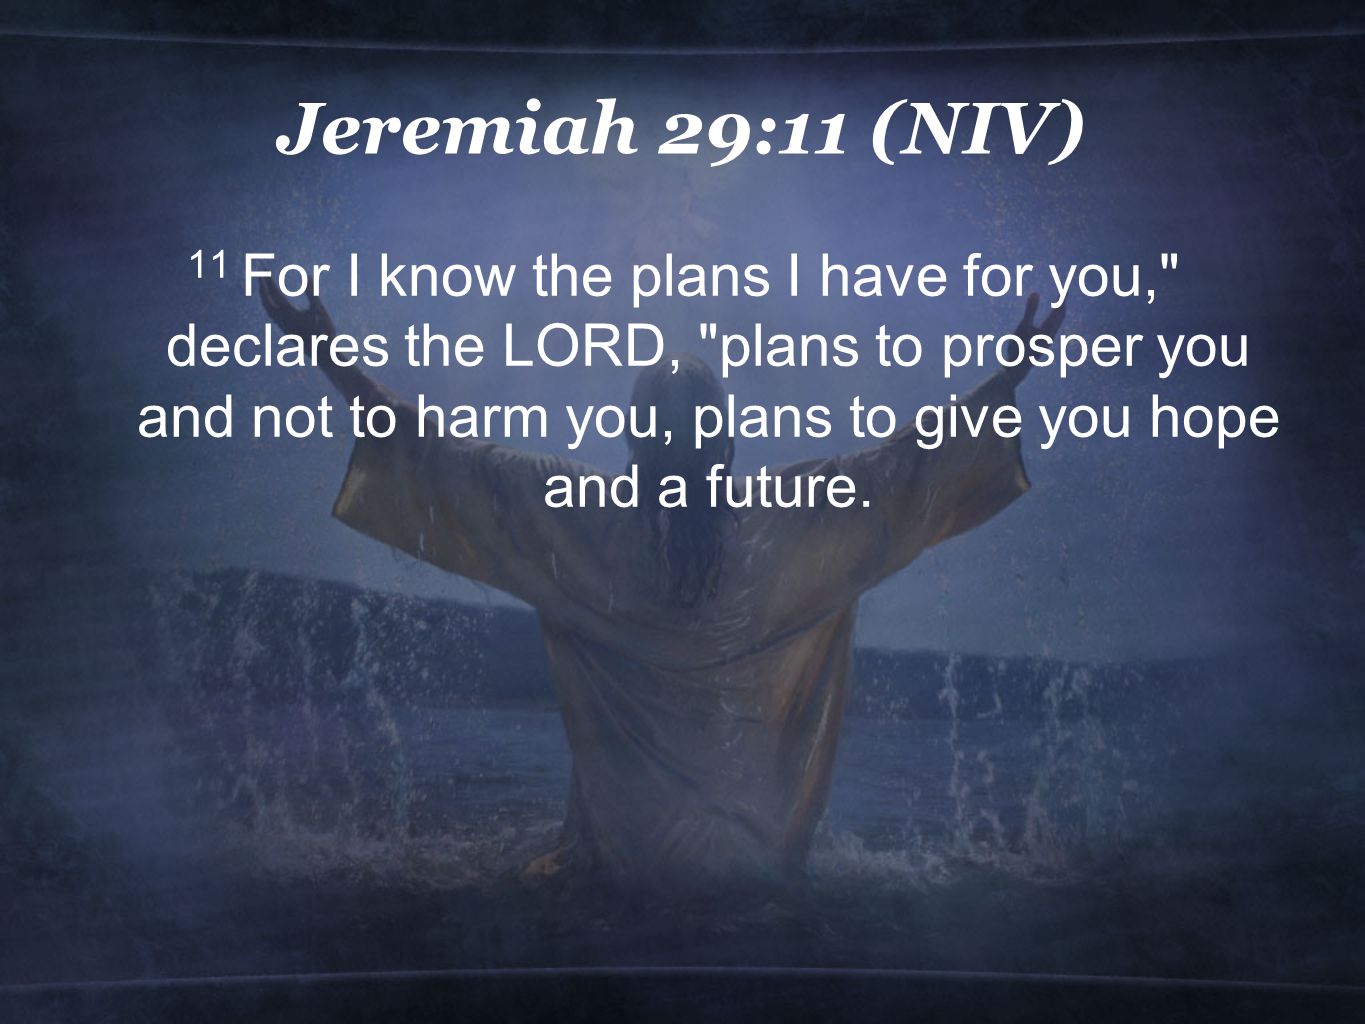 Jeremiah 29:11 (NIV) 11 For I know the plans I have for you, declares the LORD, plans to prosper you and not to harm you, plans to give you hope and a future.